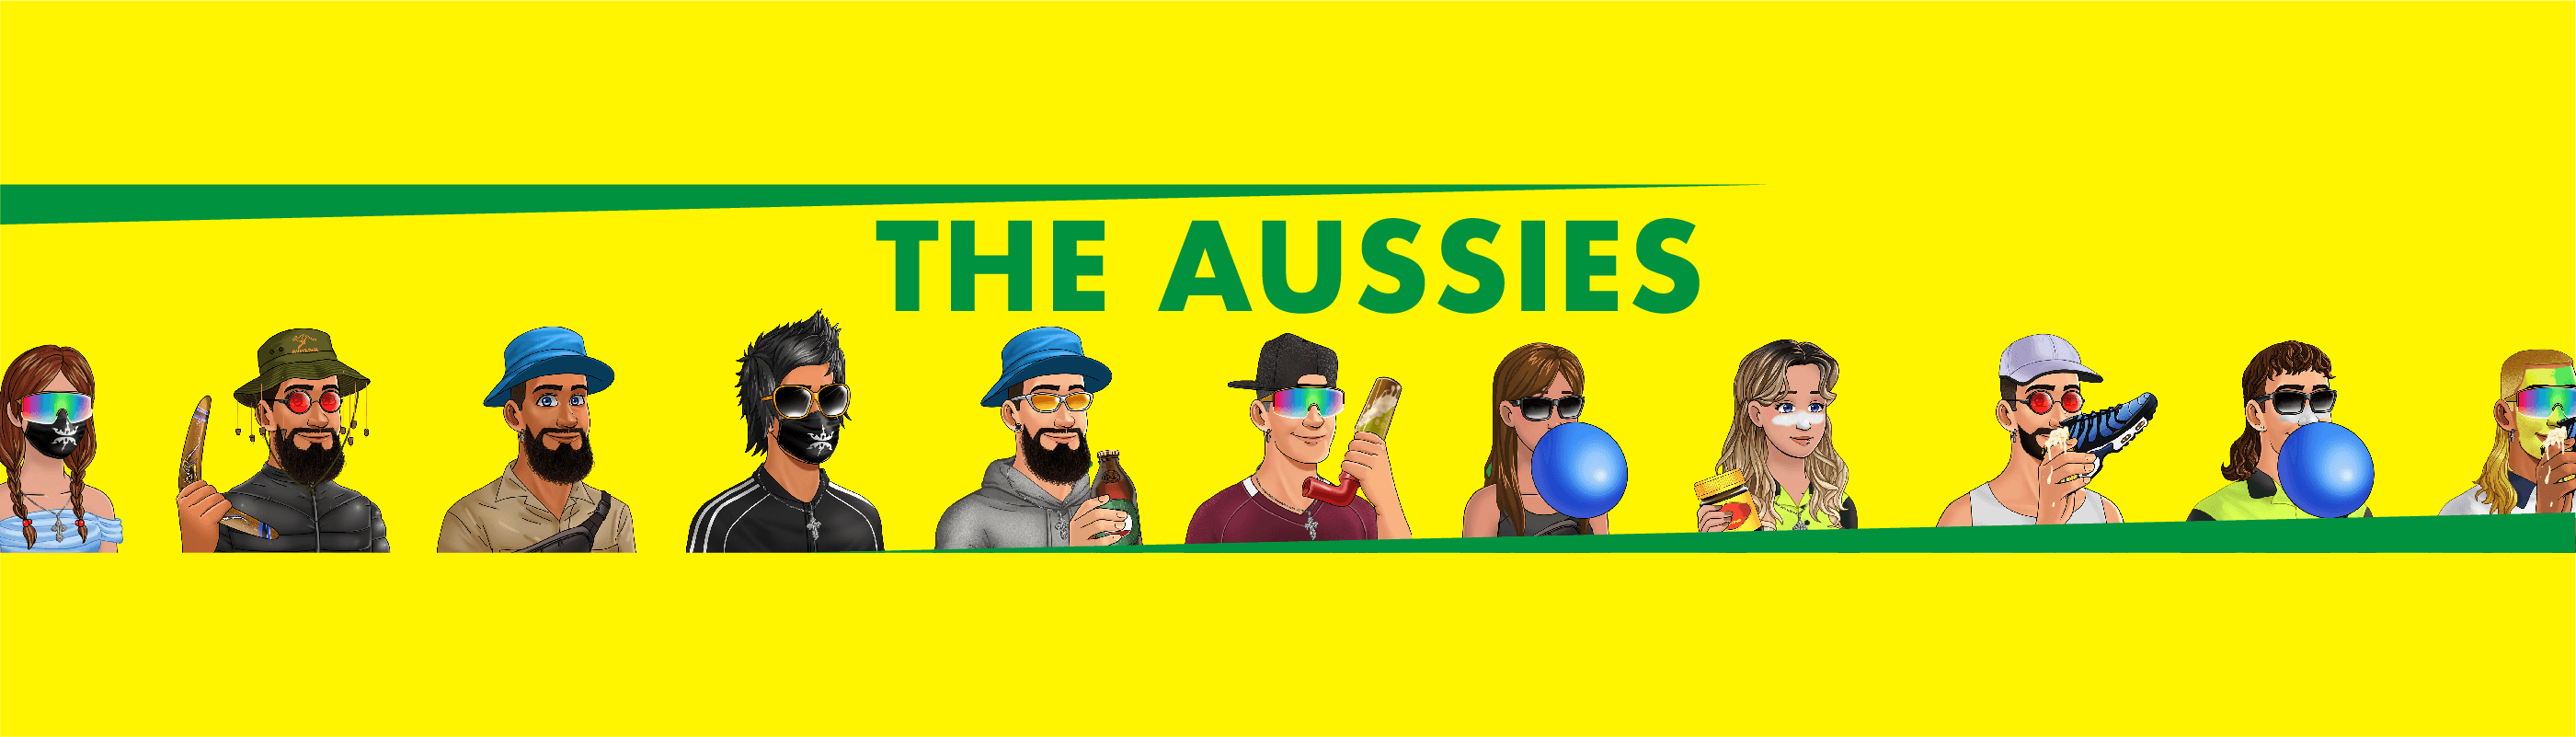 TheAussies バナー